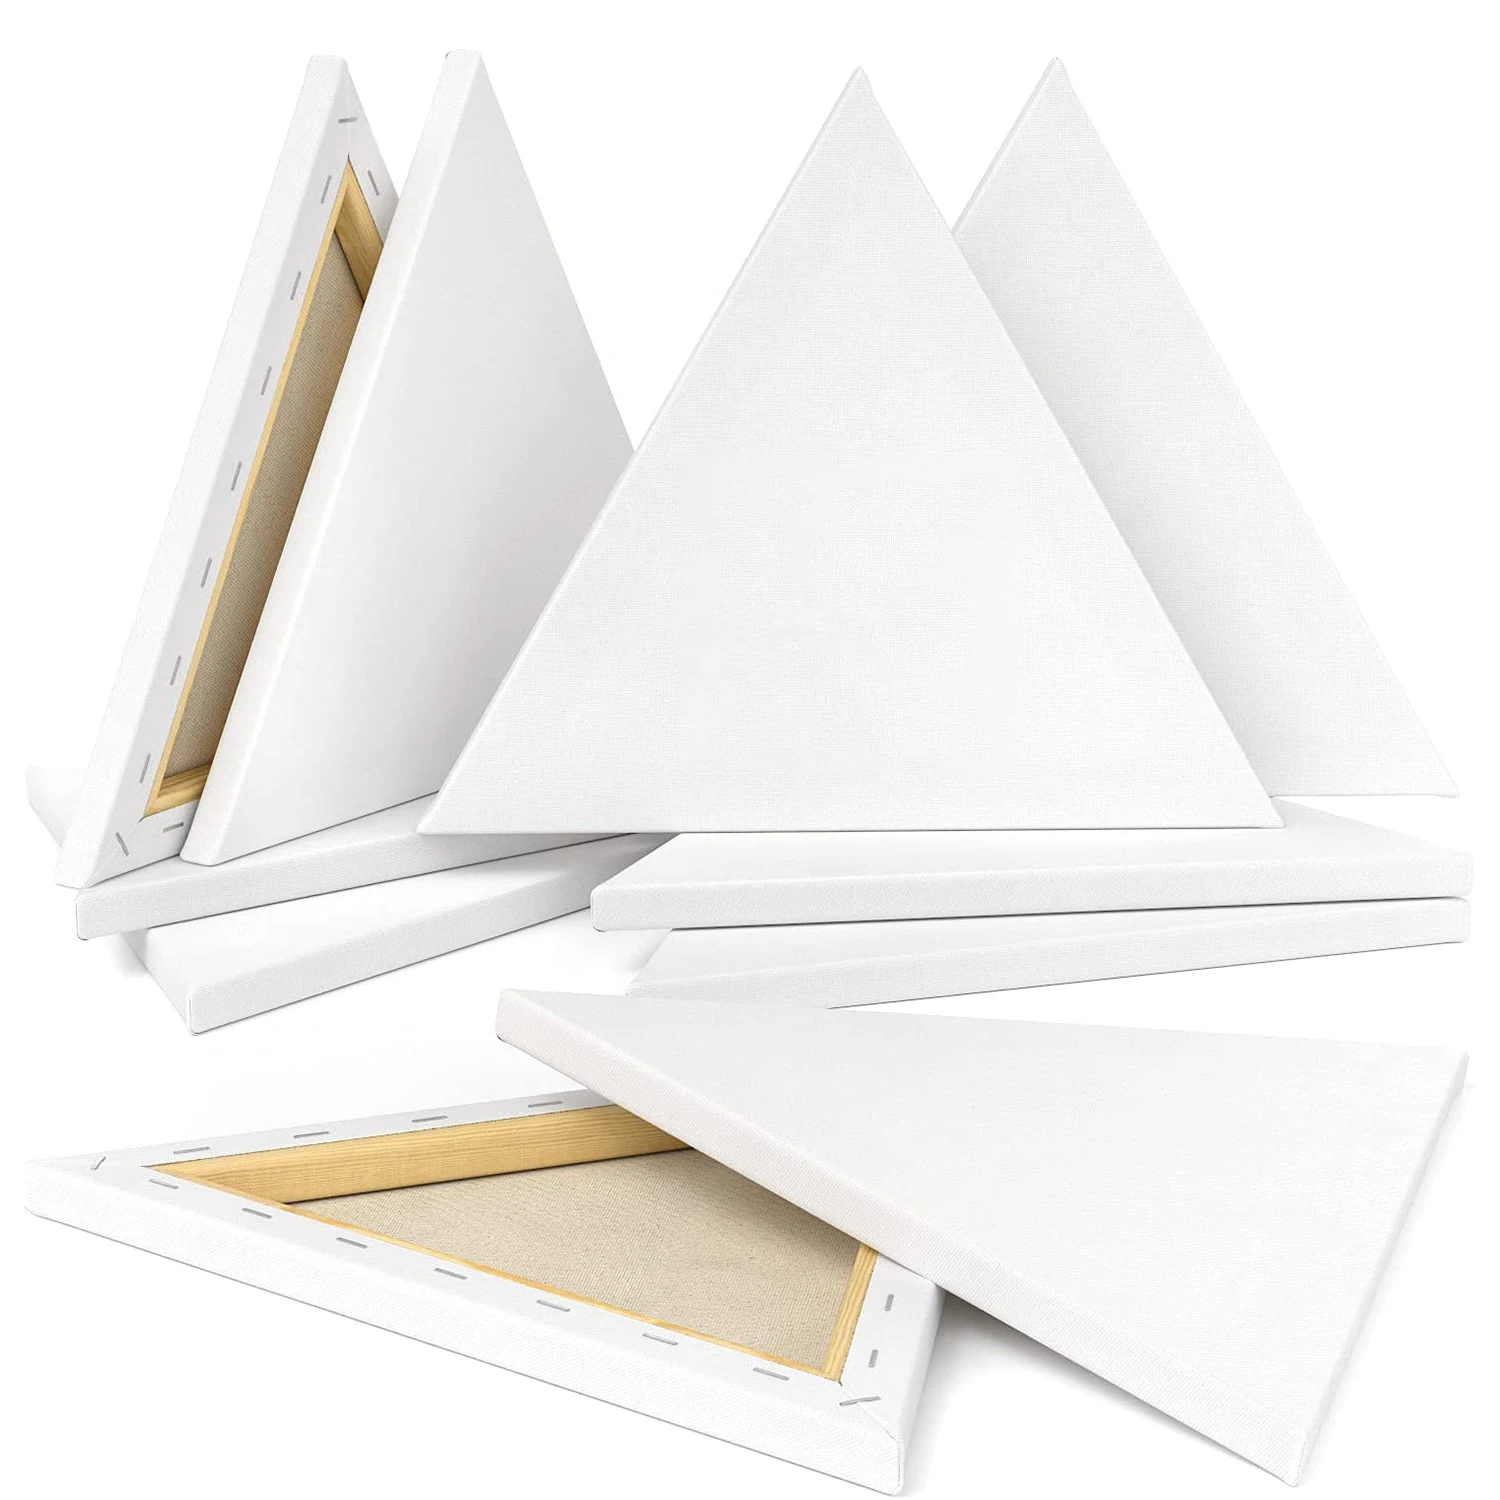 Stretched Canvas Set of 4 Triangle Blank Canvas on Pine Wood Frame 100% Cotton Art Supplies for Acrylic Pouring and Oil Painting